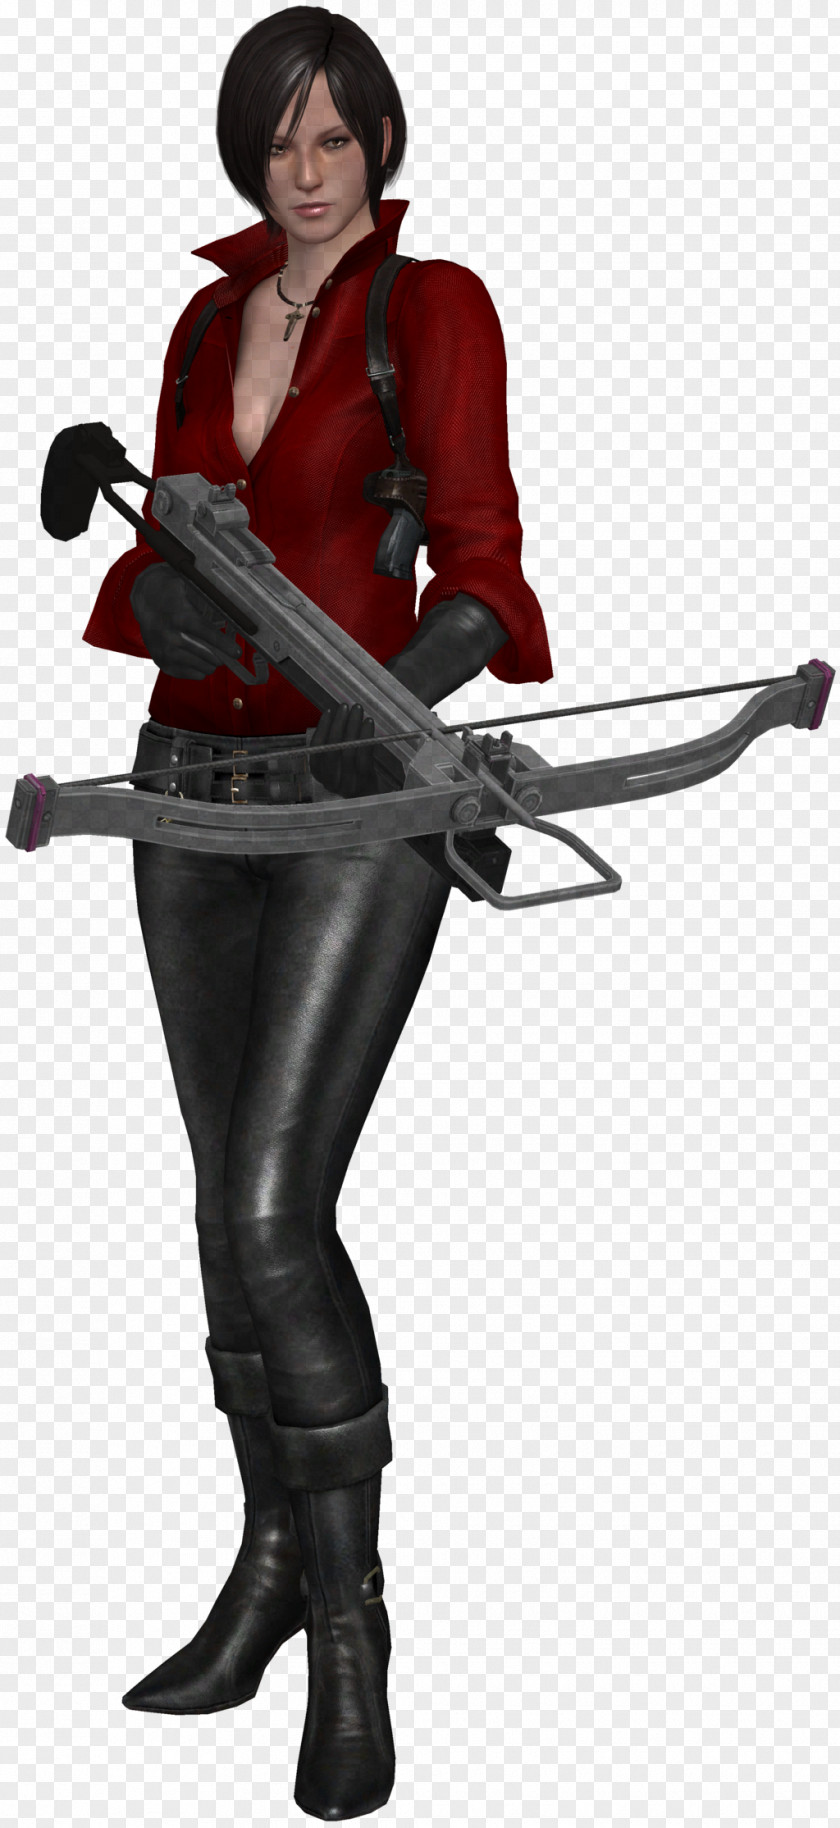 Resident Evil Ada Wong 6 4 Leon S. Kennedy Video Game PNG